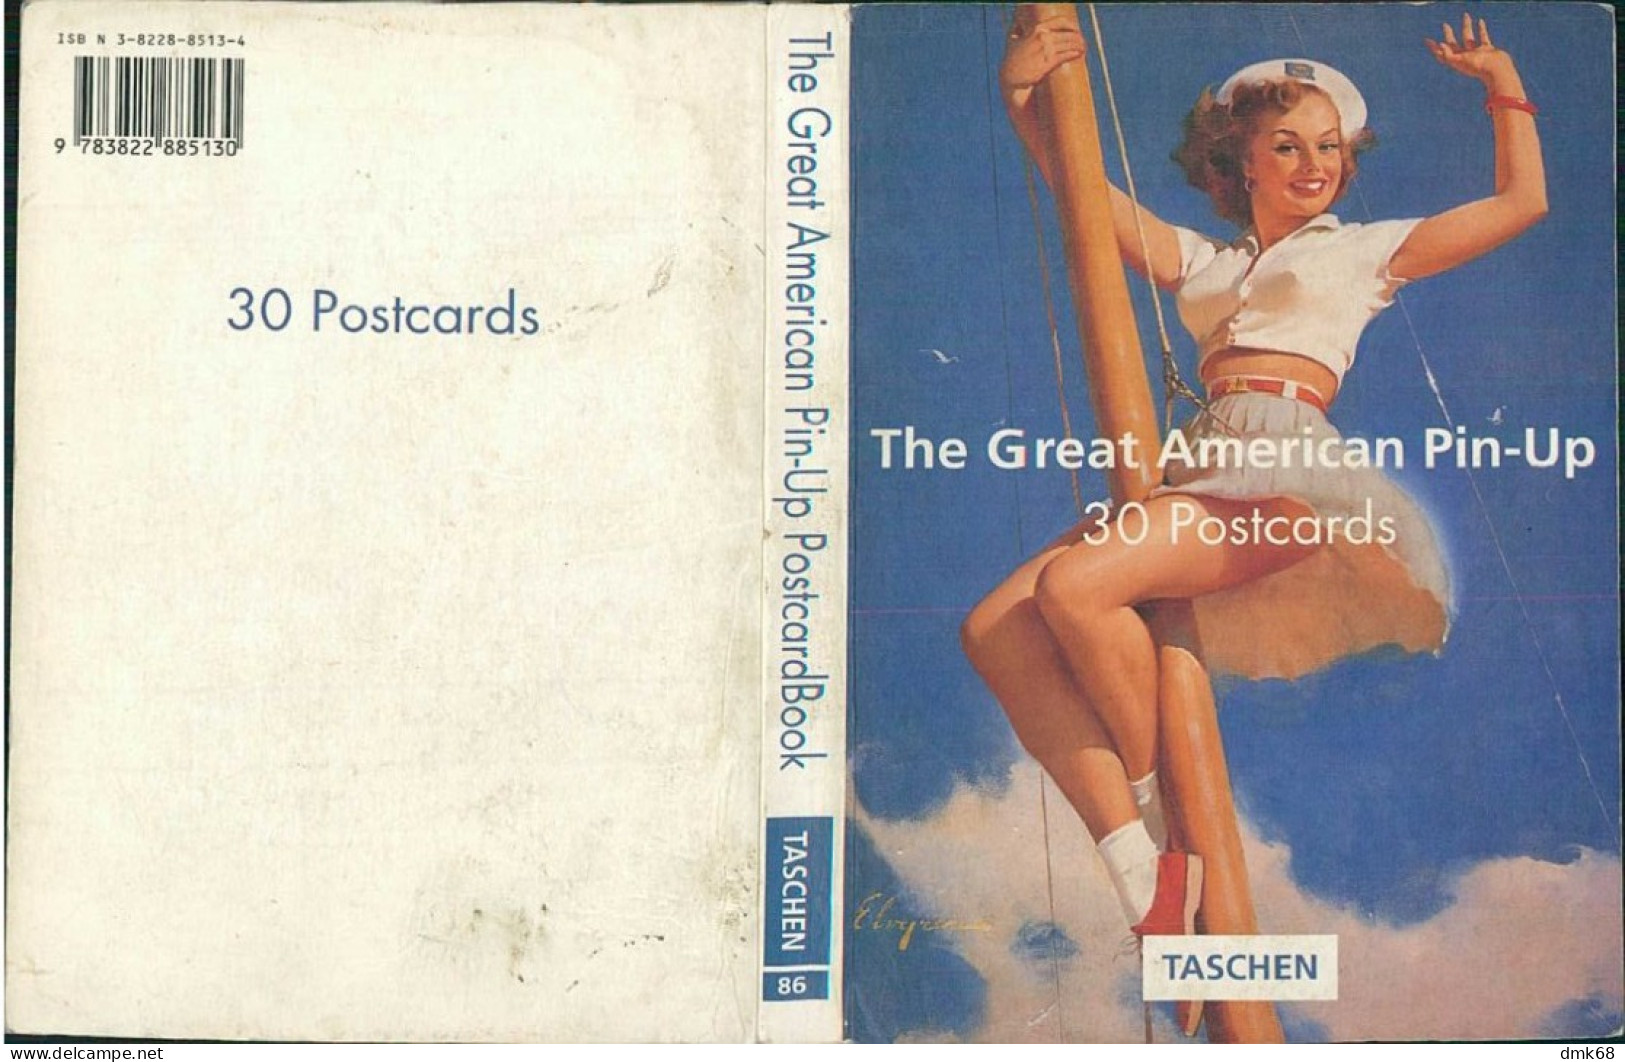 THE GREAT AMERICAN PIN-UP - EDIT TASCHEN - PRINTED IN GERMANY 1996 - 23 POSTCARDS (TEM475) - Pin-Ups